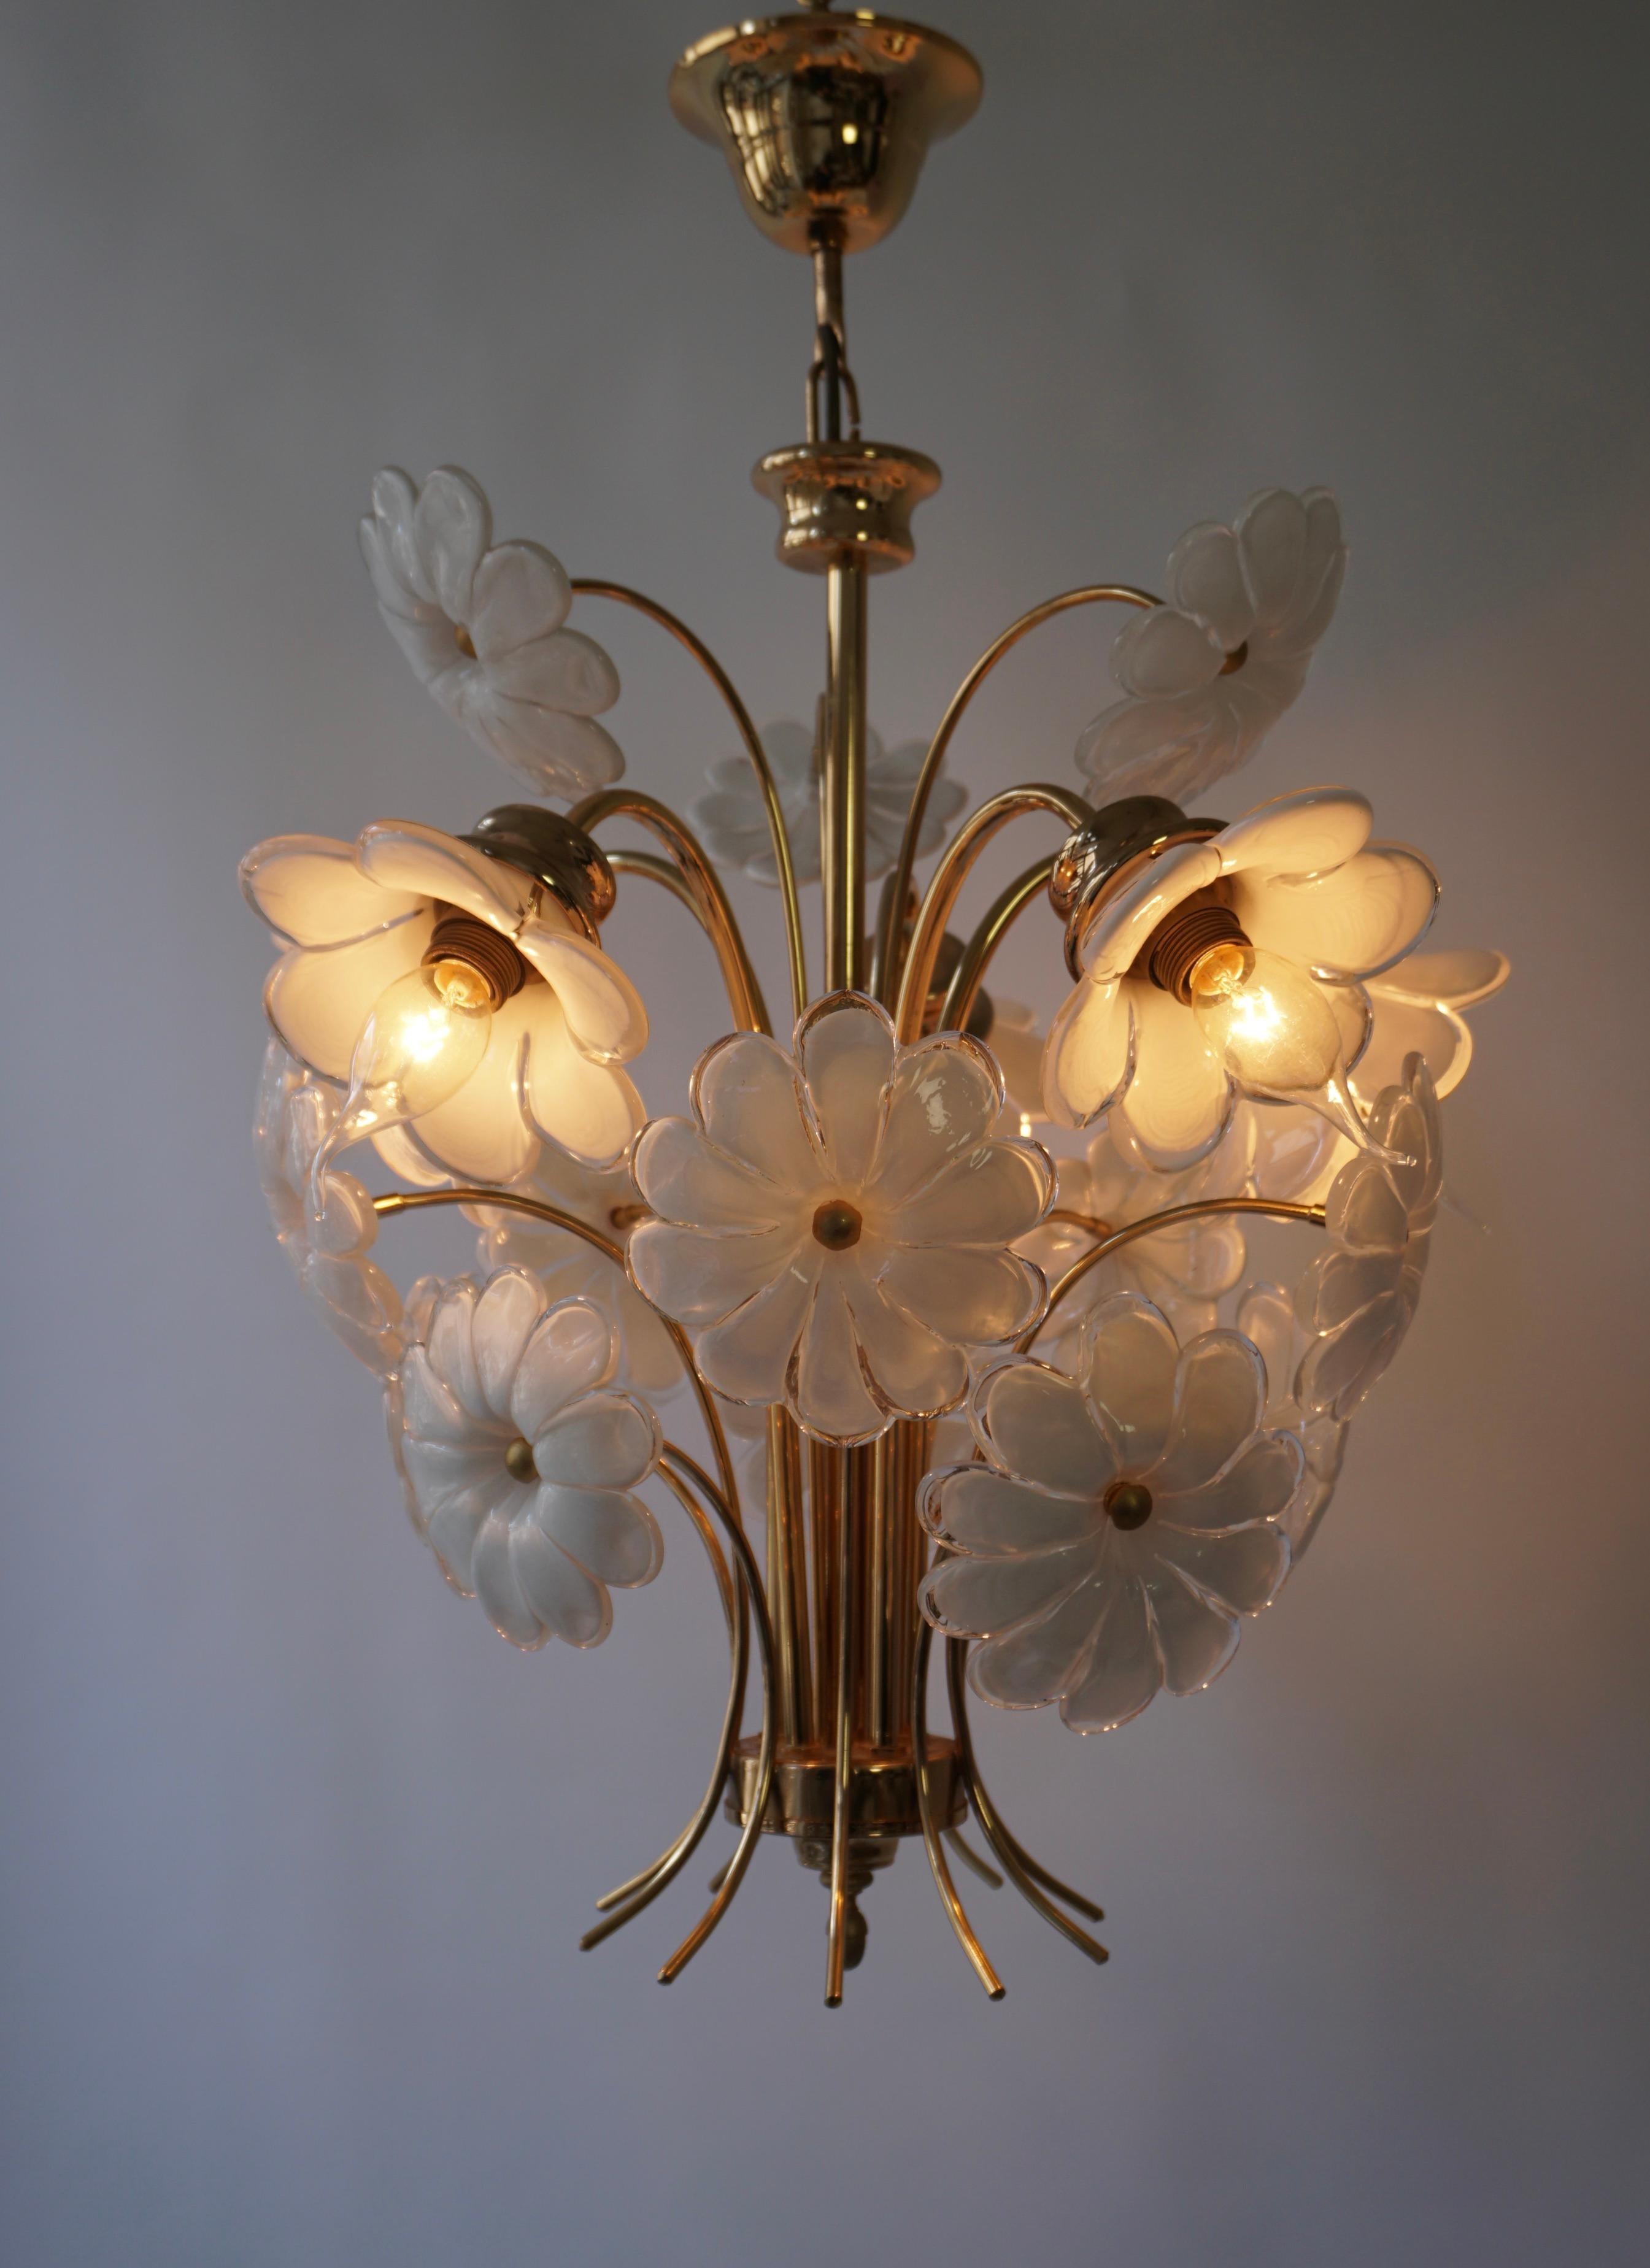 Very beautiful vintage Italian classic Franco Luce style chandelier gold-colored with white flowers.

The chandelier has five sockets for small incandescent lamps with screw base or E14 type LEDs. It is possible to install this fixture in all